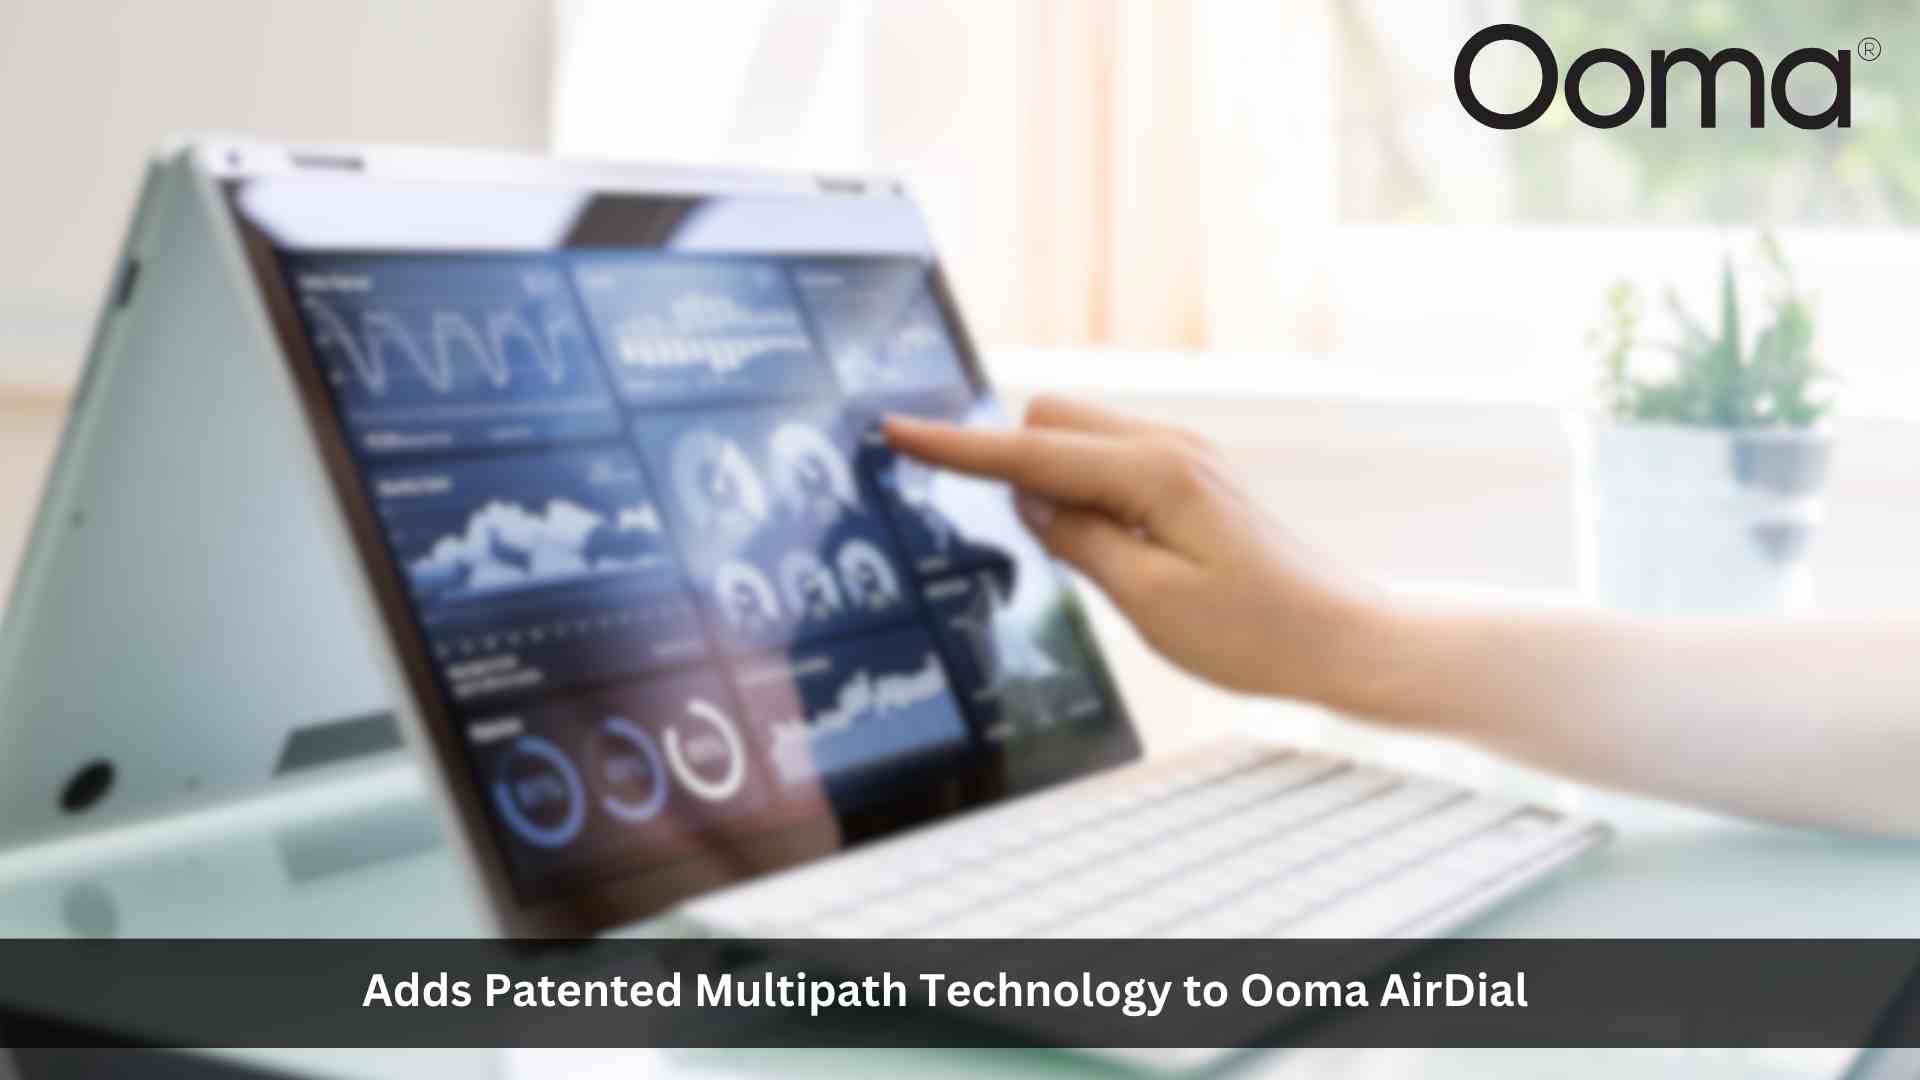 Ooma Adds Patented MultiPath Technology to Ooma AirDial, Allowing Uninterrupted Backup for POTS Replacement